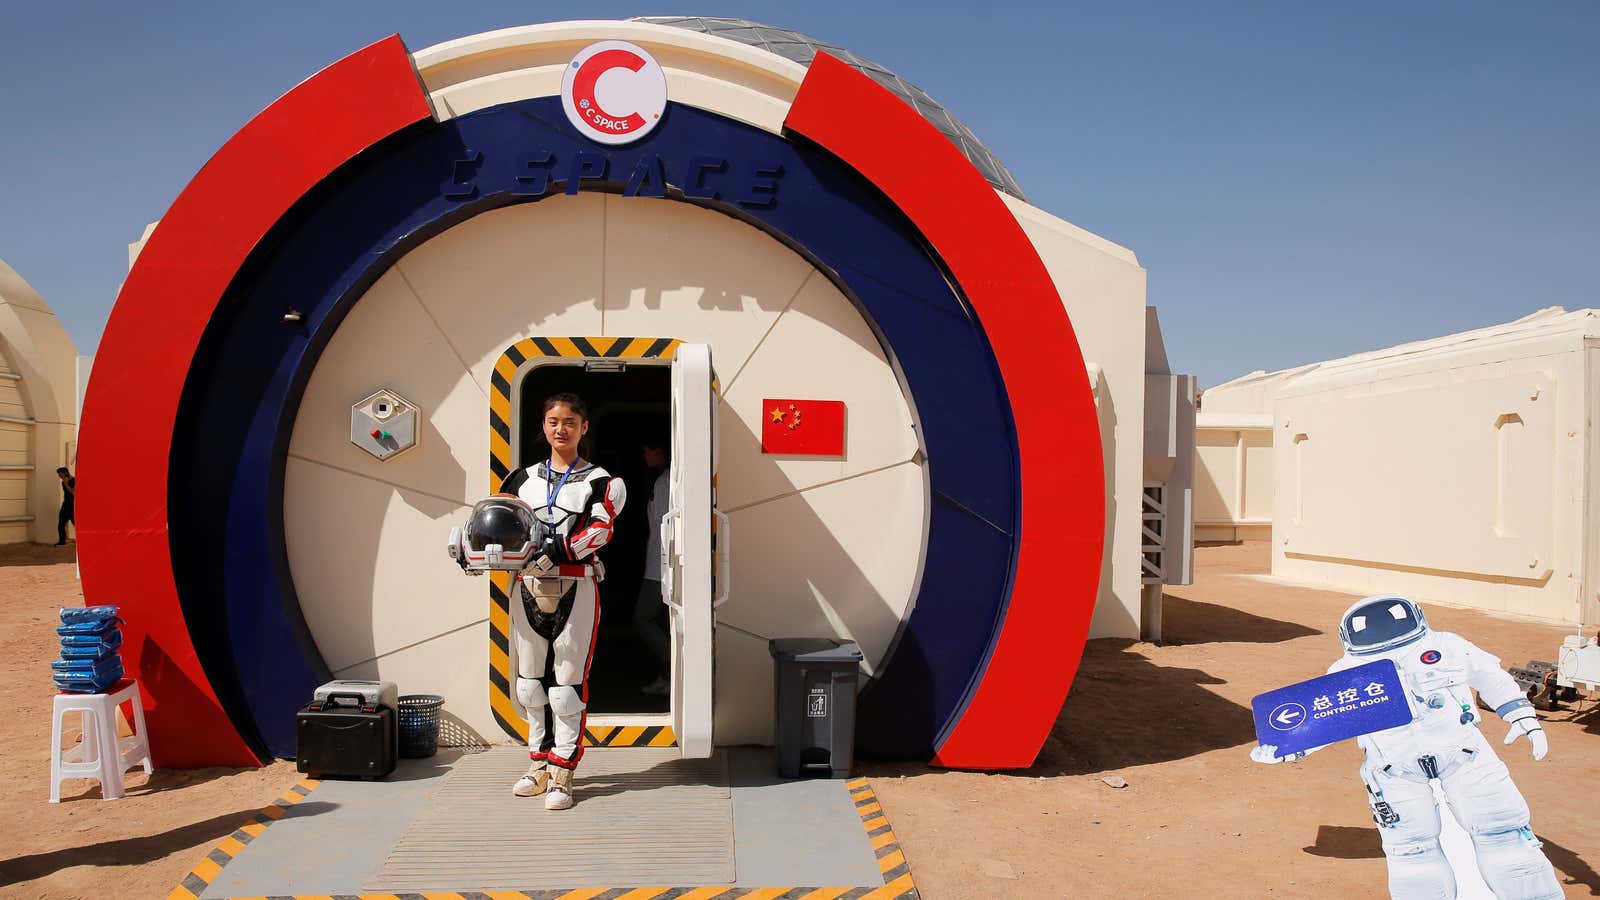 A staff member poses in a mock space suit at the C-Space Project Mars simulation base.